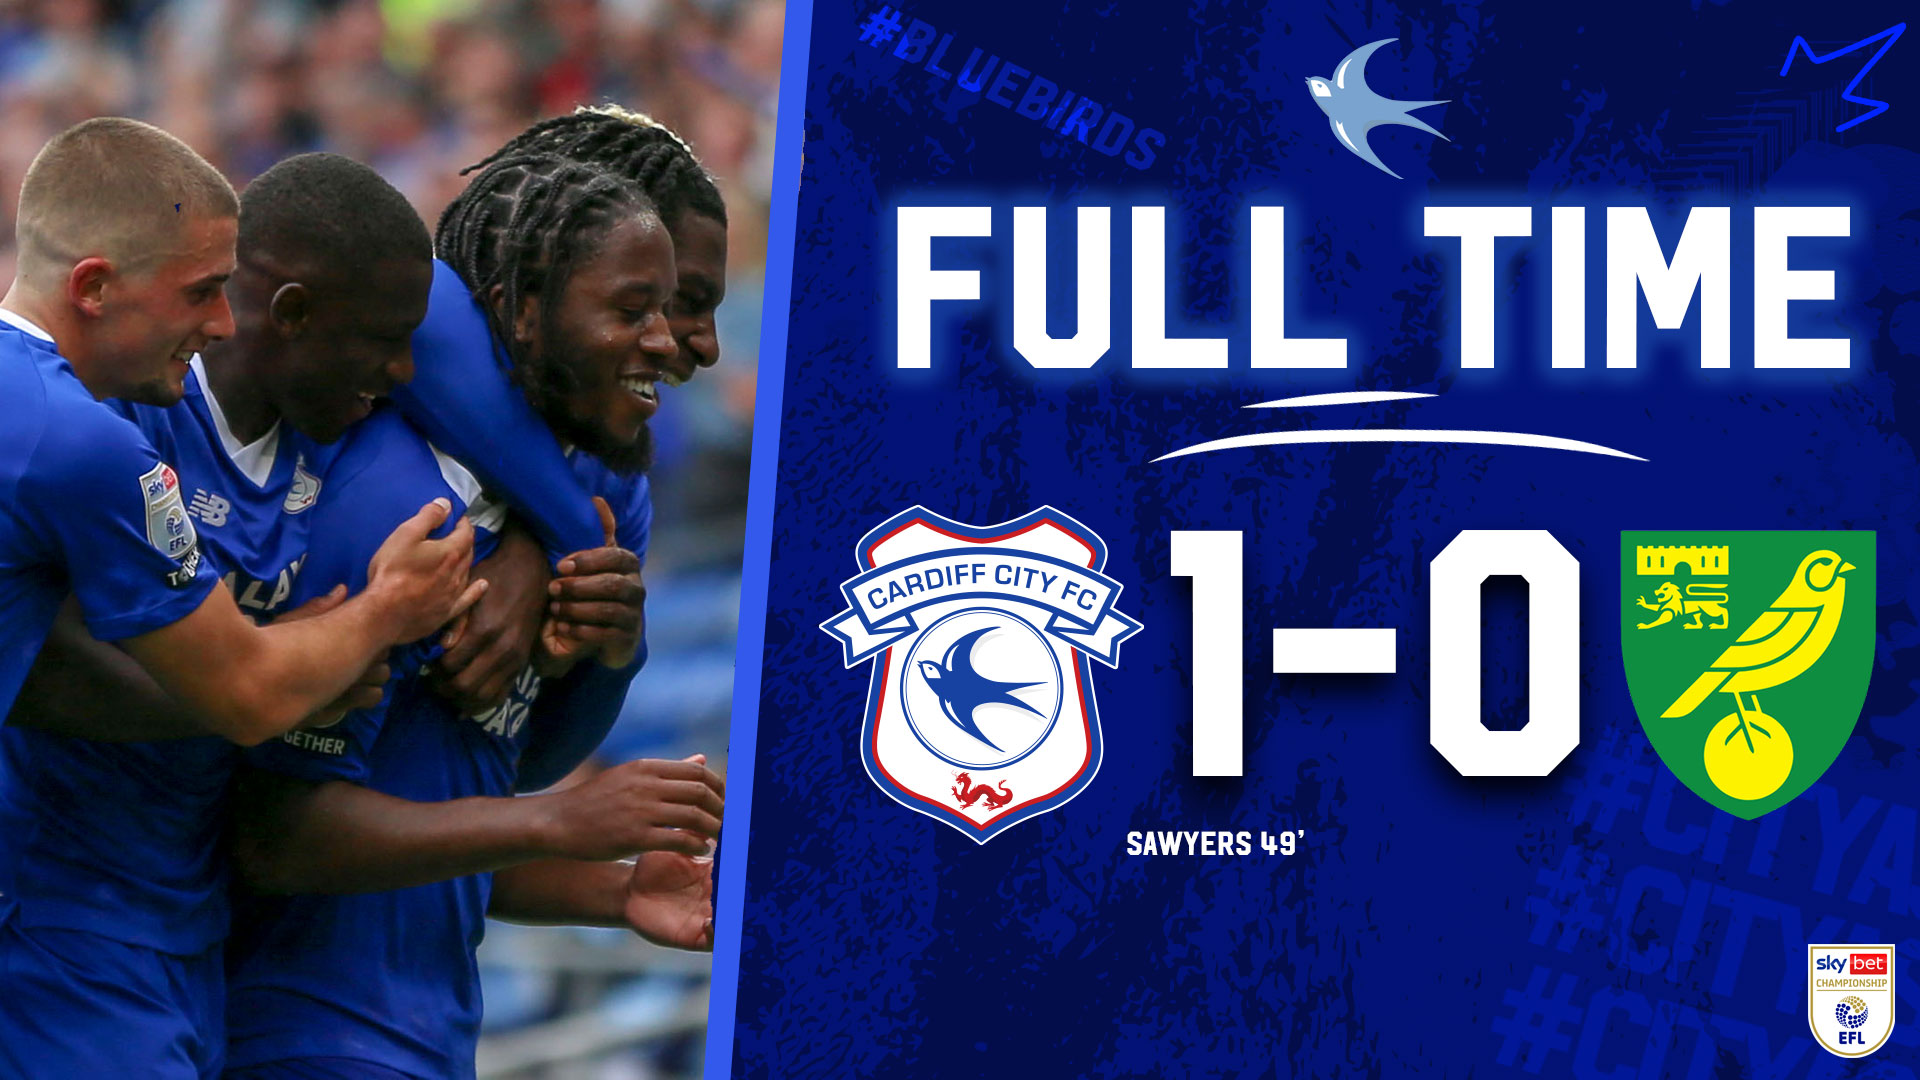 Cardiff City FC on X: Good morning, #Bluebirds! 💙 Thank you for